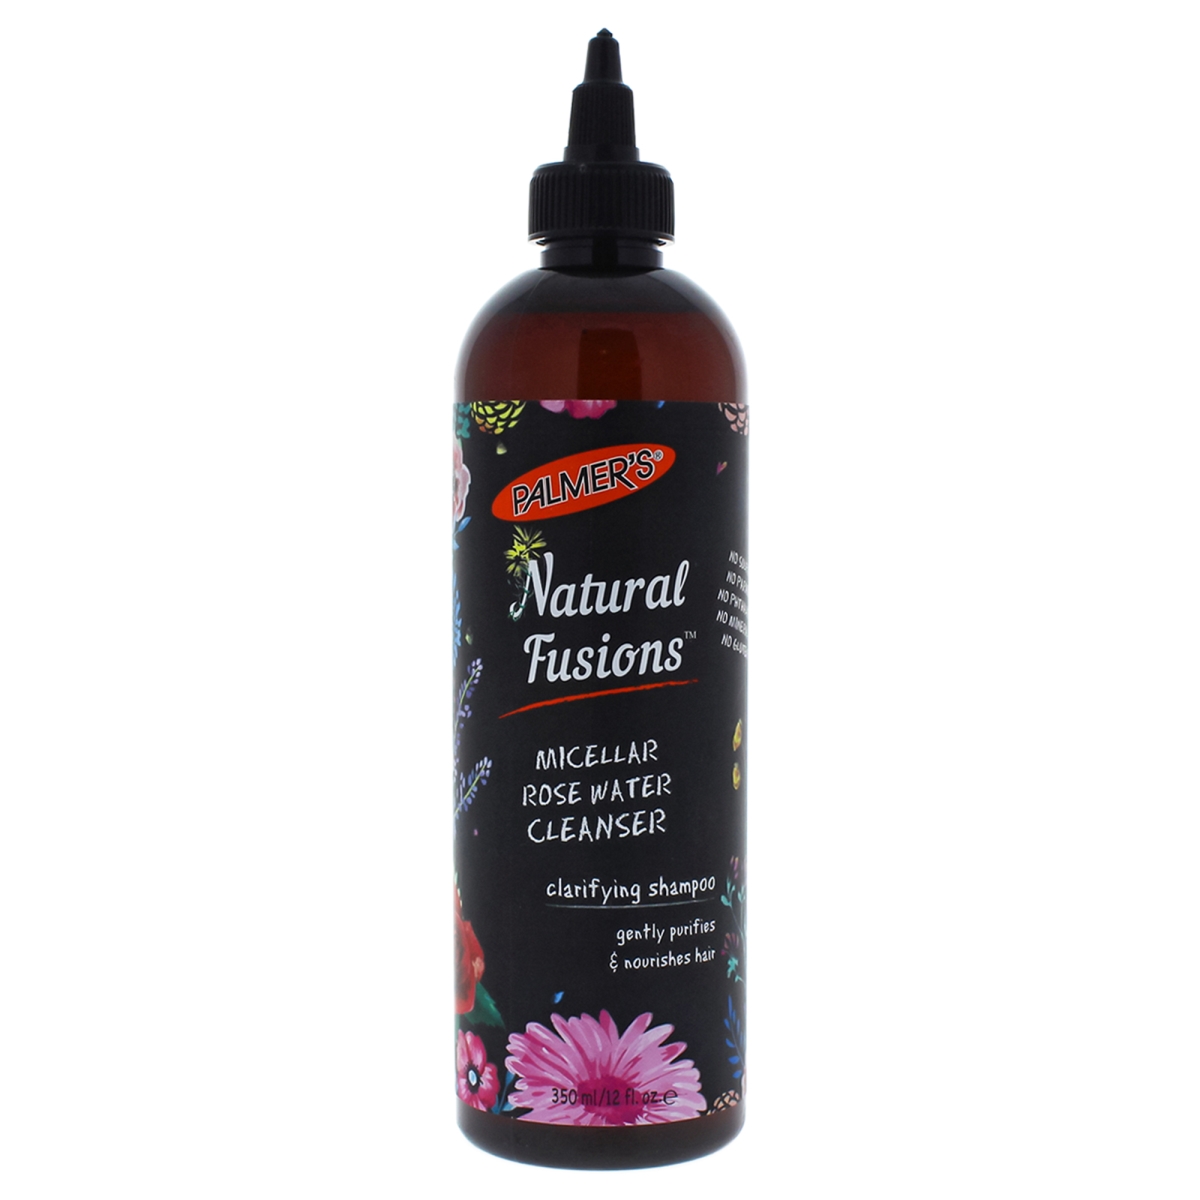 I0088438 Natural Fusions Cleanser Micellar Rose Water Shampoo For Unisex - 12 Oz